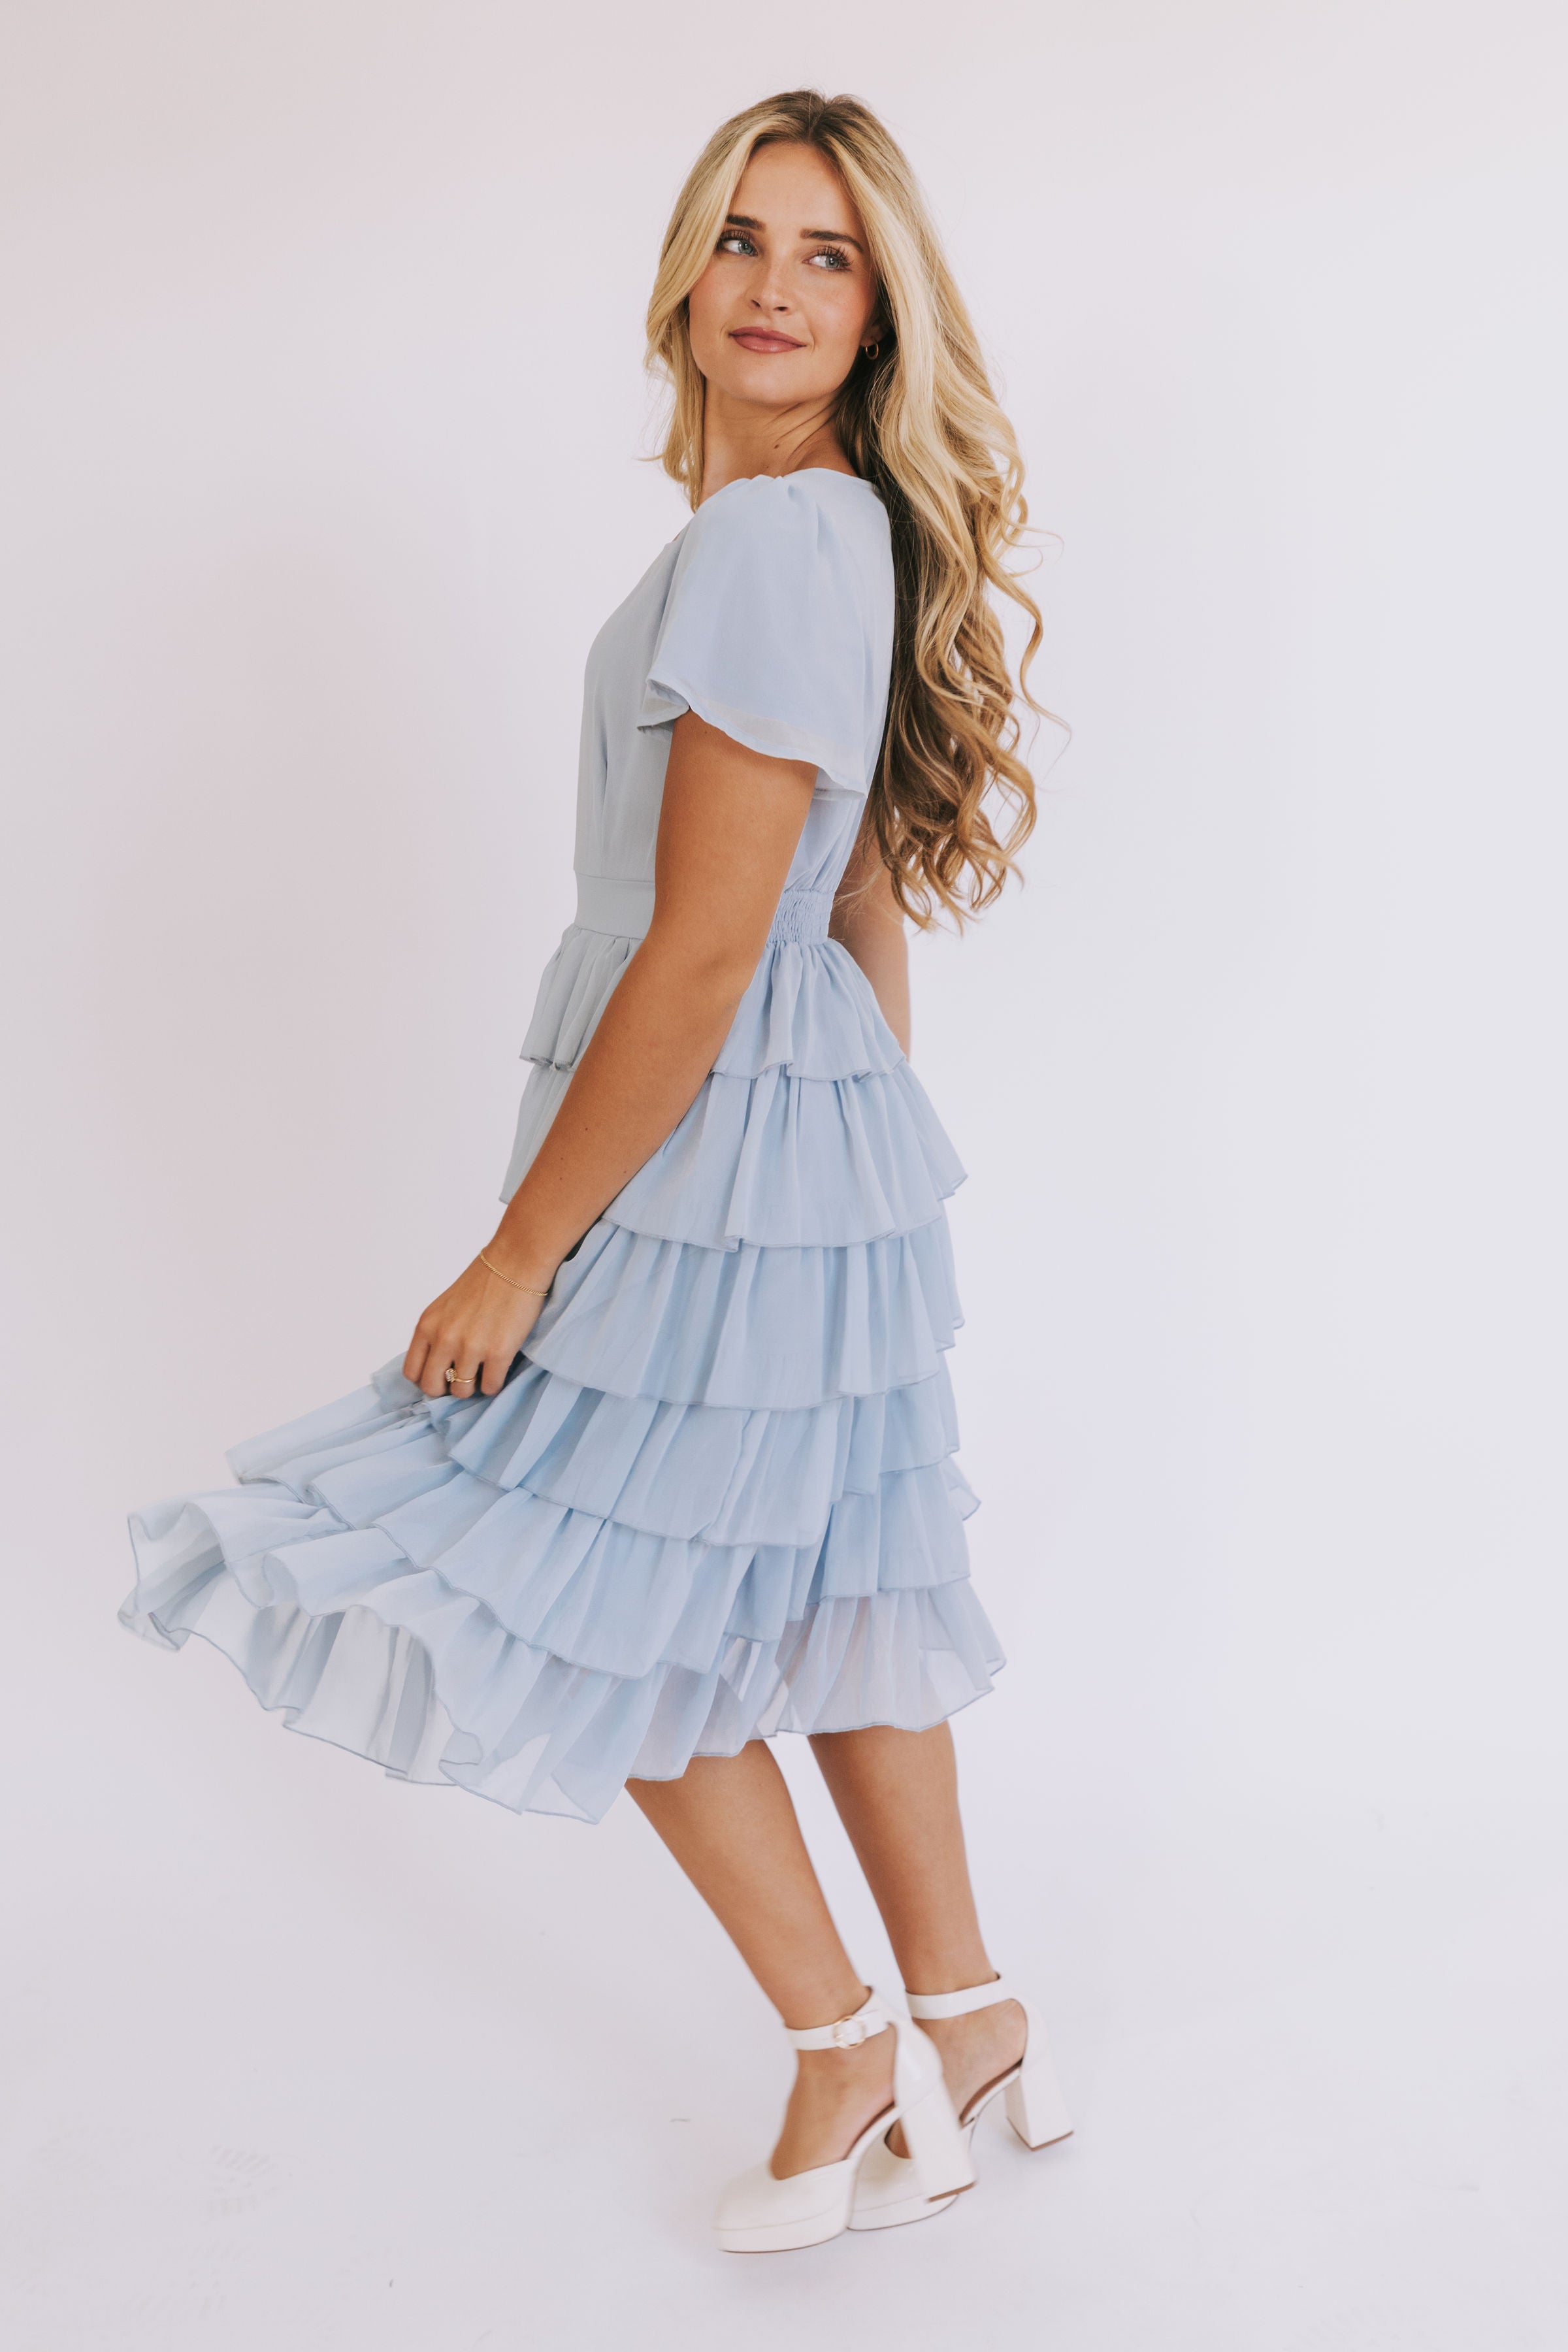 ONE LOVED BABE - Forever With You Dress - 3 Colors!